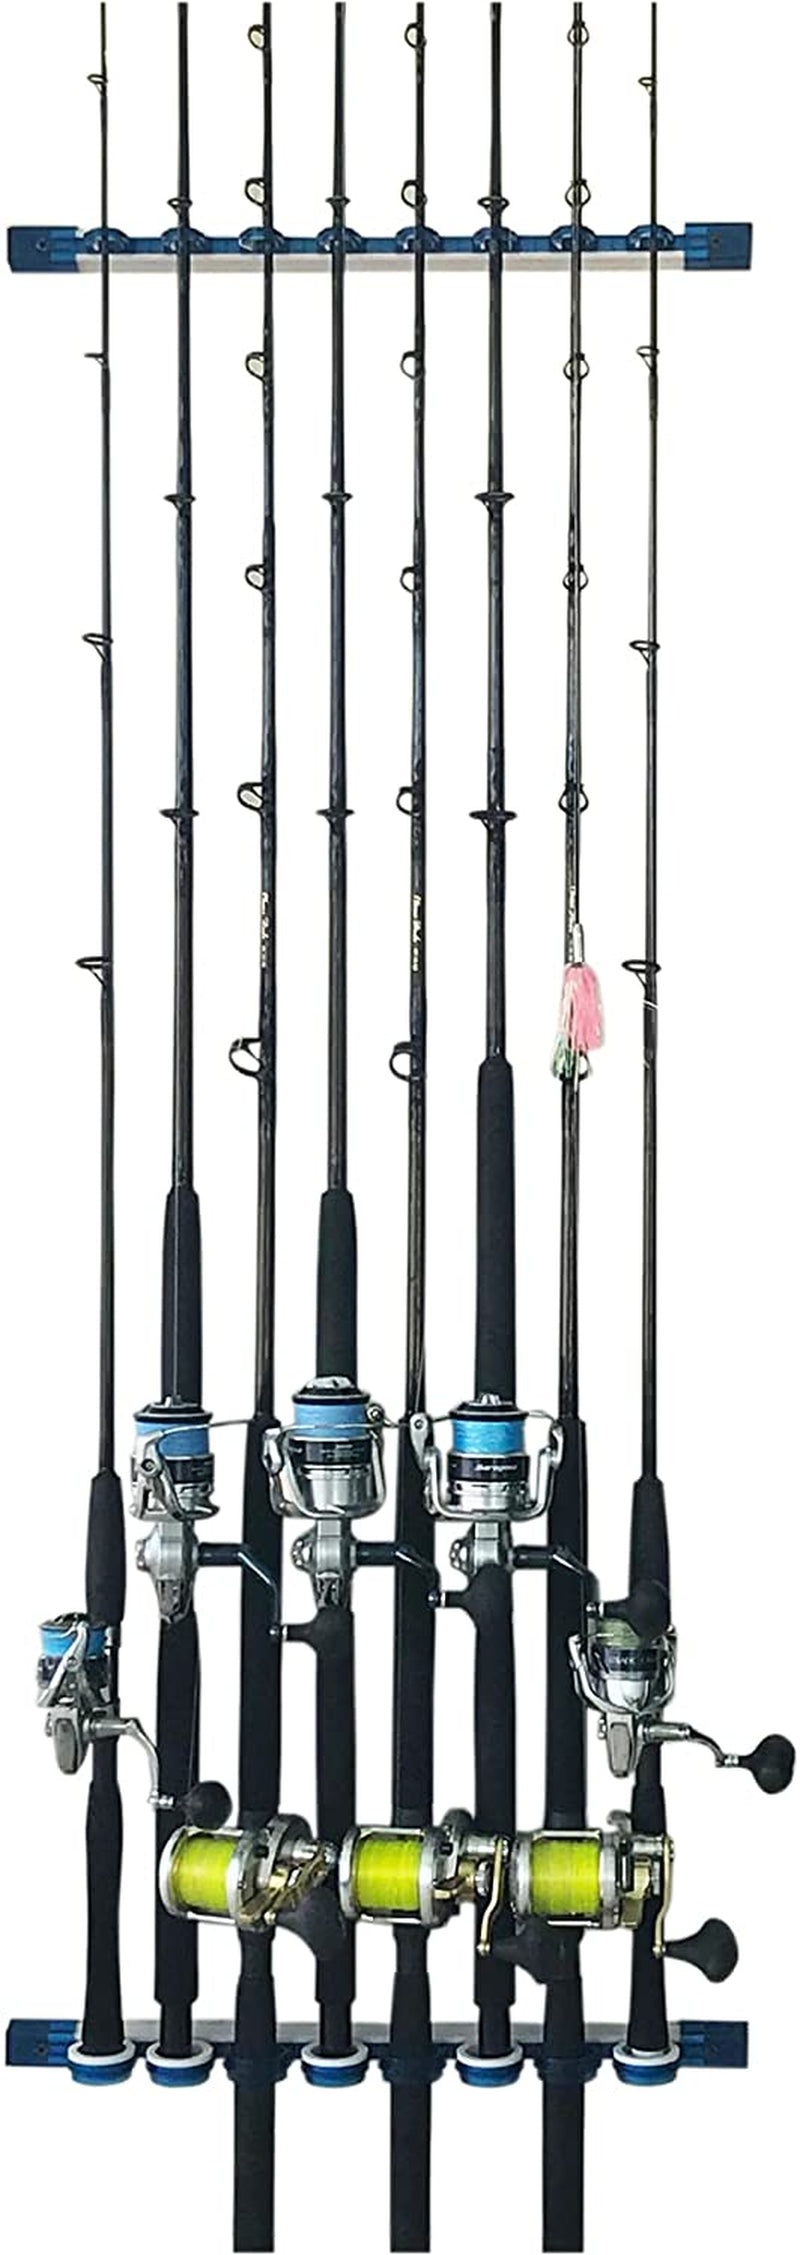 Rush Creek Creations All Weather Fishing Rod Storage Wall, Ceiling, or Garage Rack, Aluminum 10 Rod Sporting Goods > Outdoor Recreation > Fishing > Fishing Rods Rush Creek Creations ABS Plastic 8 Rod  